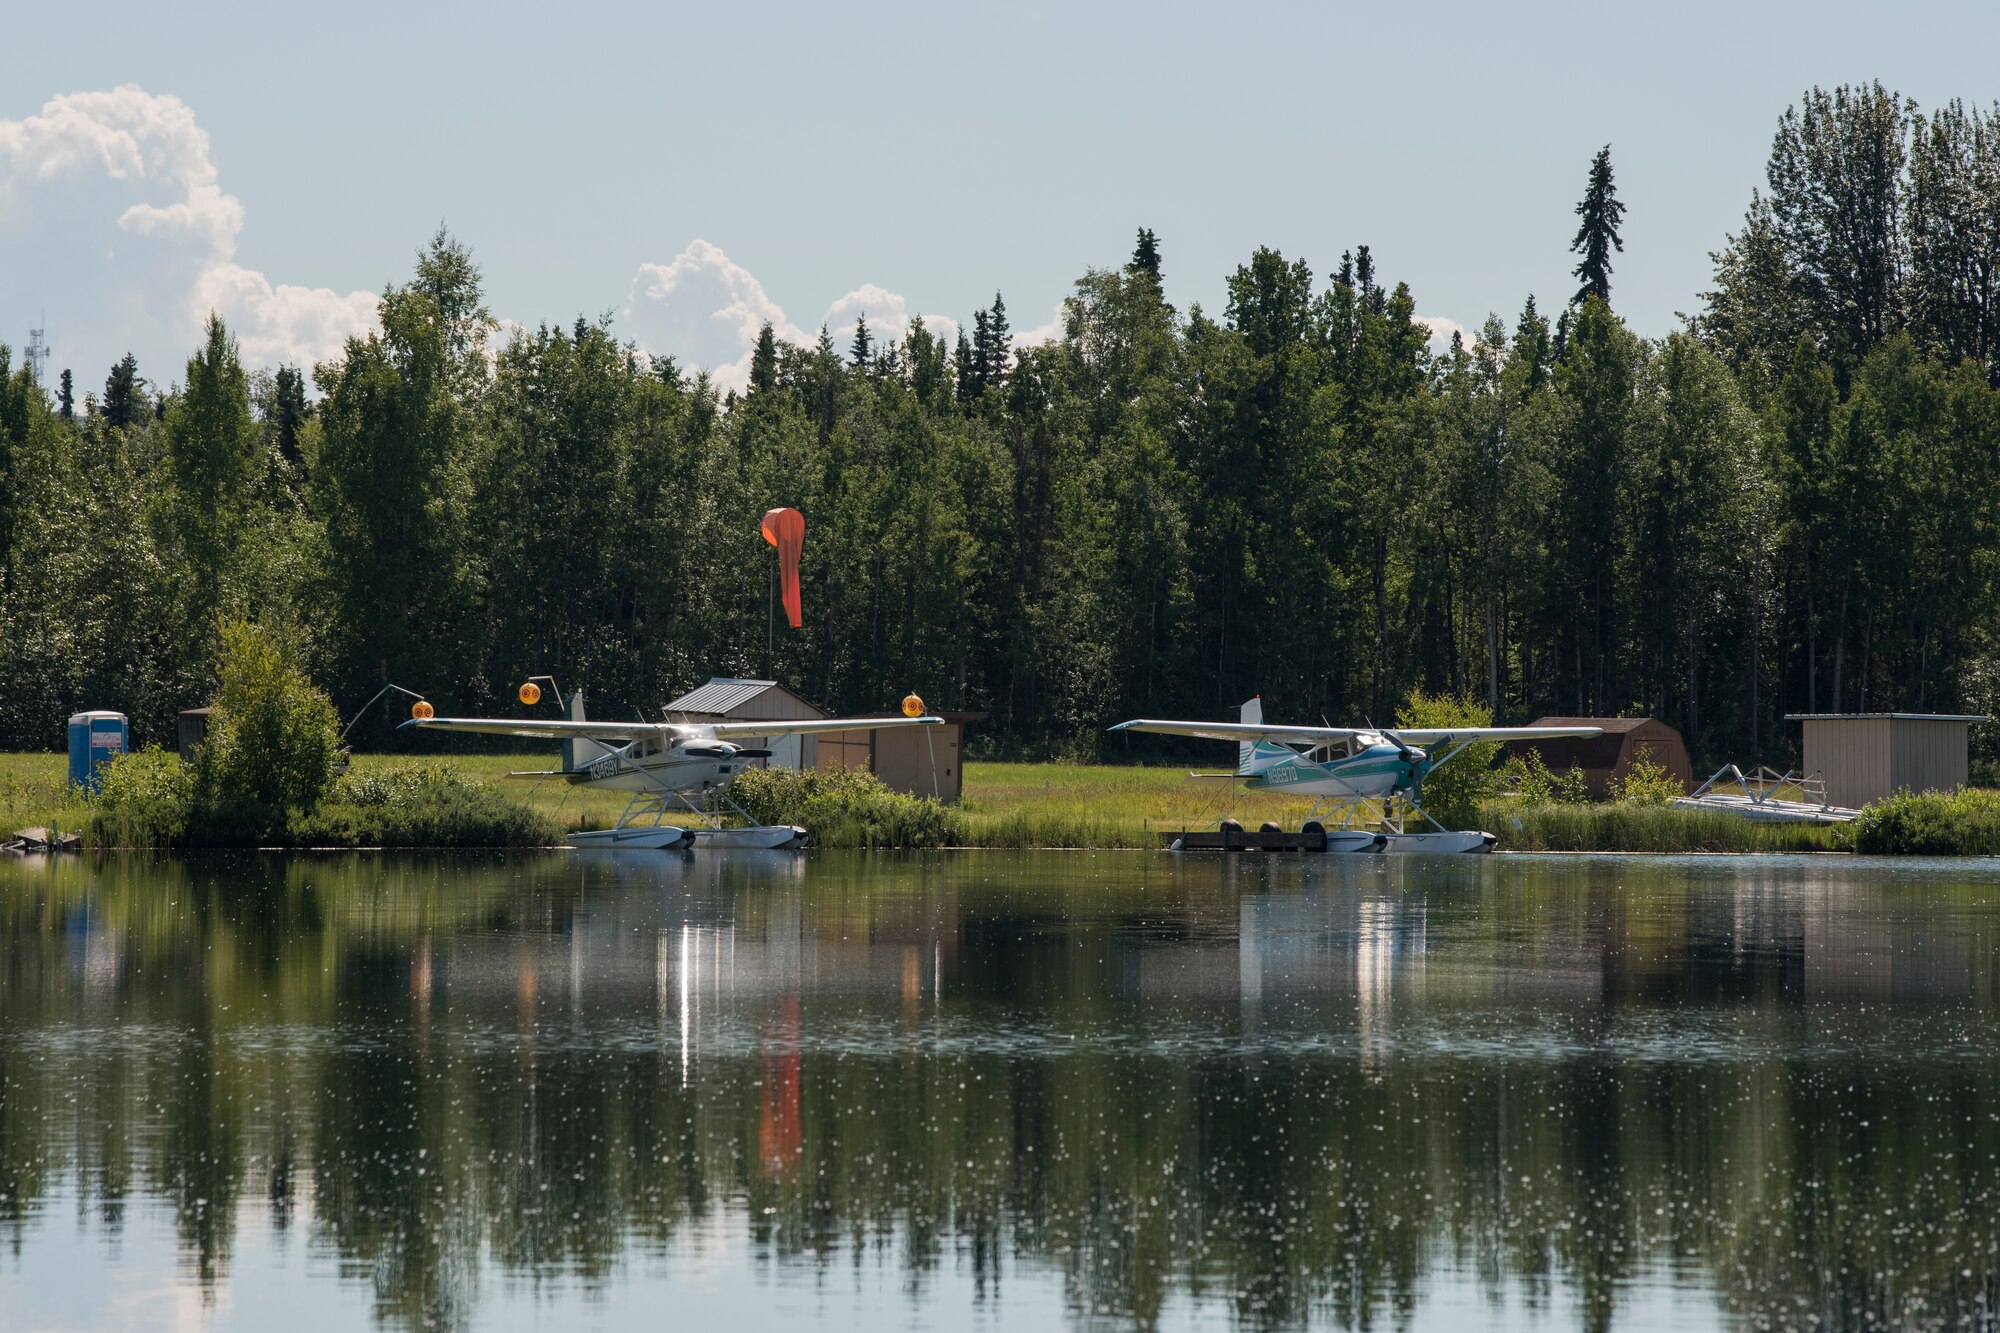 Private aircraft are docked at the Elmendorf Aero club water landing area and floating docks on Lower Sixmile Lake at Joint Base Elmendorf-Richardson, Alaska, July 2, 2018. The club offers rentable spaces for seaplanes, flying boats, and amphibious aircraft designed to take off and alight on water.